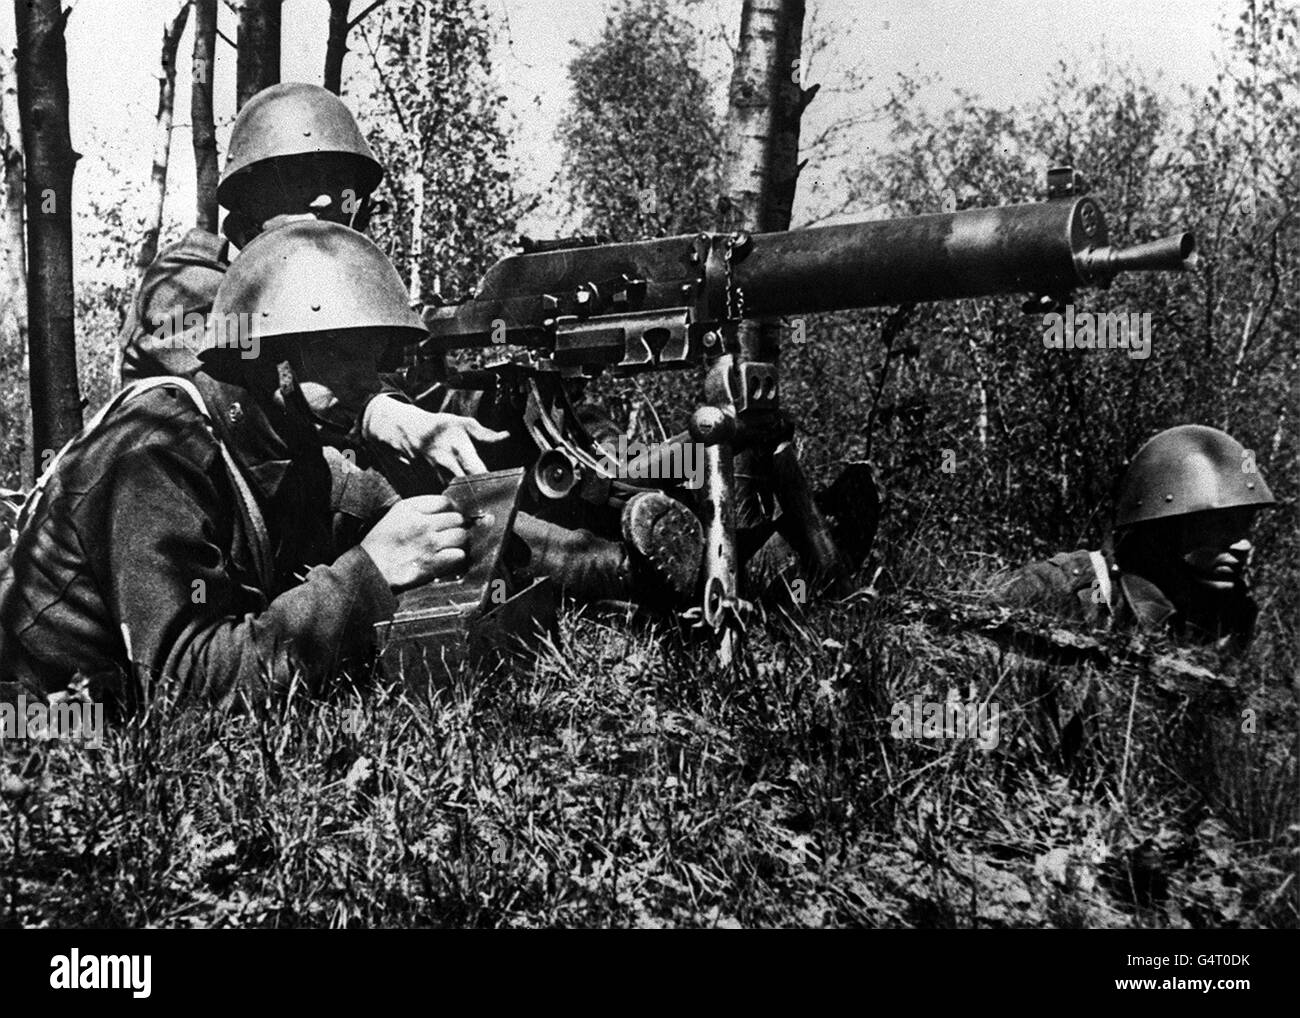 21/11/1938 - On this Day in History - Nazi forces occupied western Czechoslovakia and declared its people German citizens A Czech machine gun crew near the frontier during Czechoslovakian Army manoeuvres in 1938. The Czech Army was left powerless to prevent the ceding of the Sudetenland to Germany under the Munich agreement. German occupation began on 1st October 1938. Stock Photo